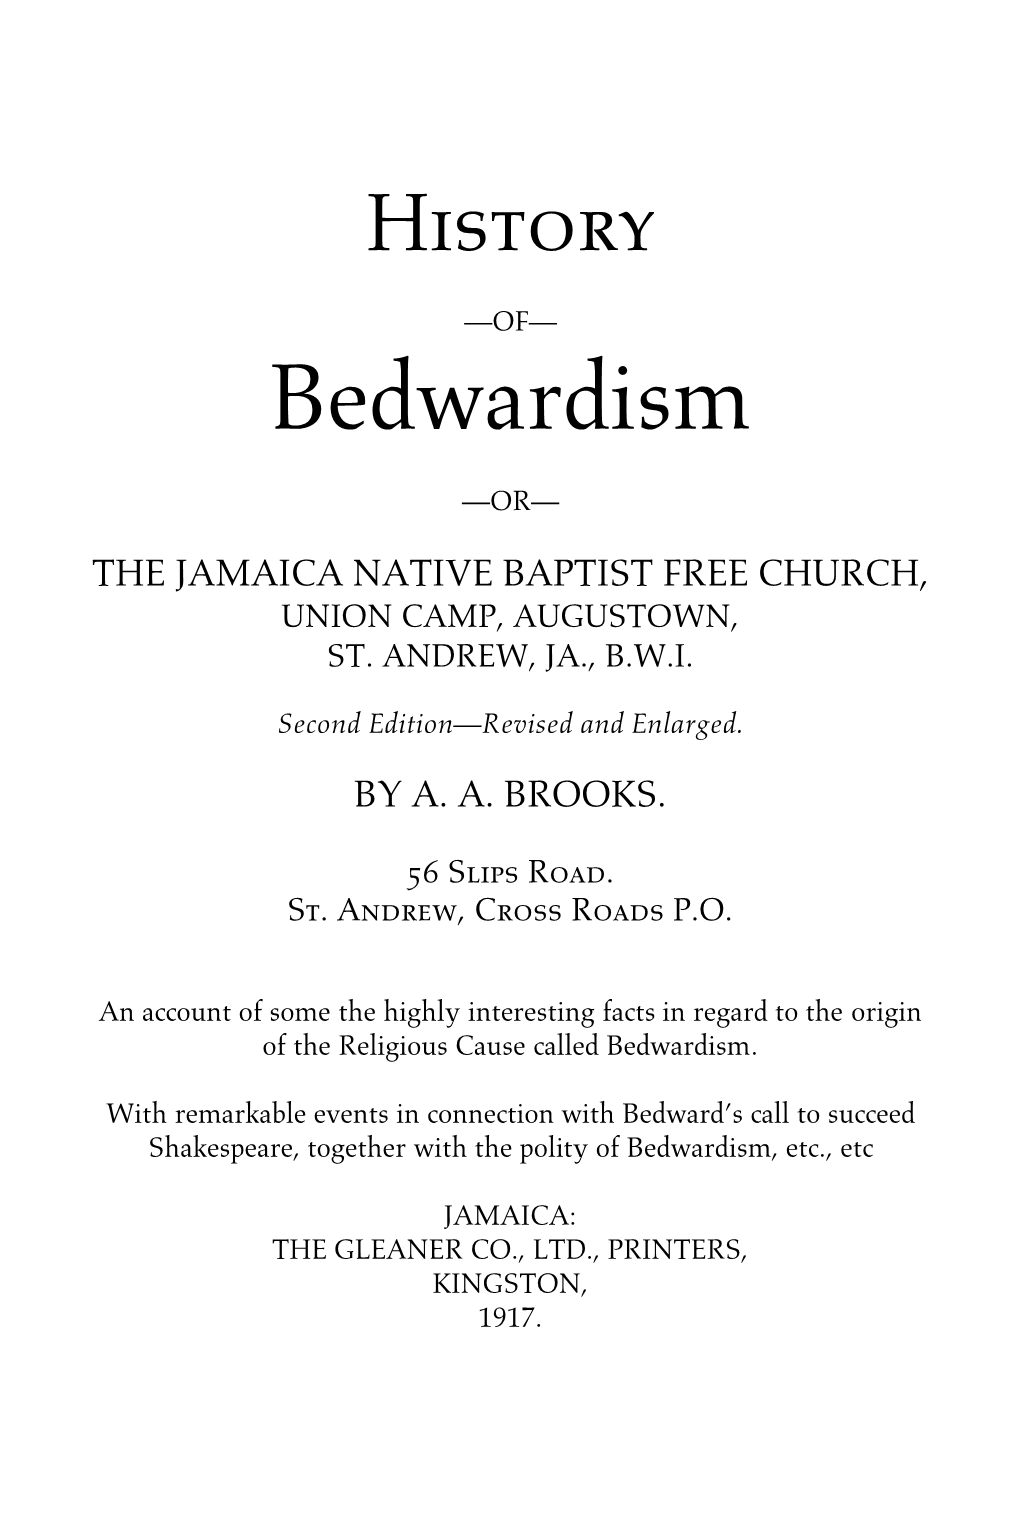 A History of Bedwardism